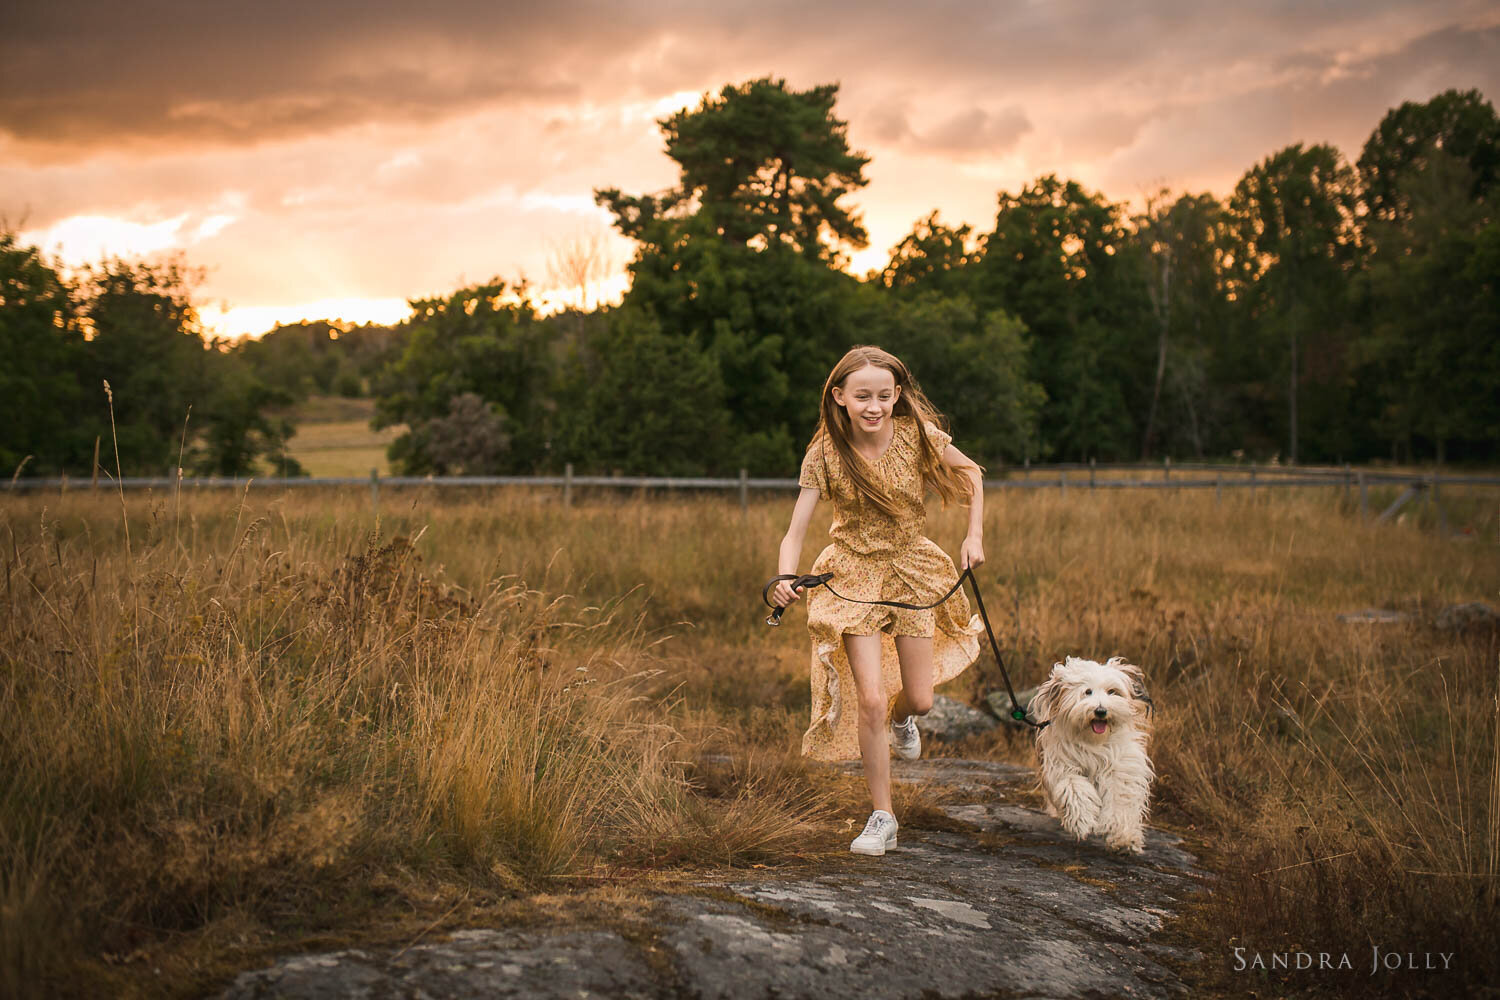 girl-running-with-her-dog-in-field-by-sandra-jolly-photography.jpg